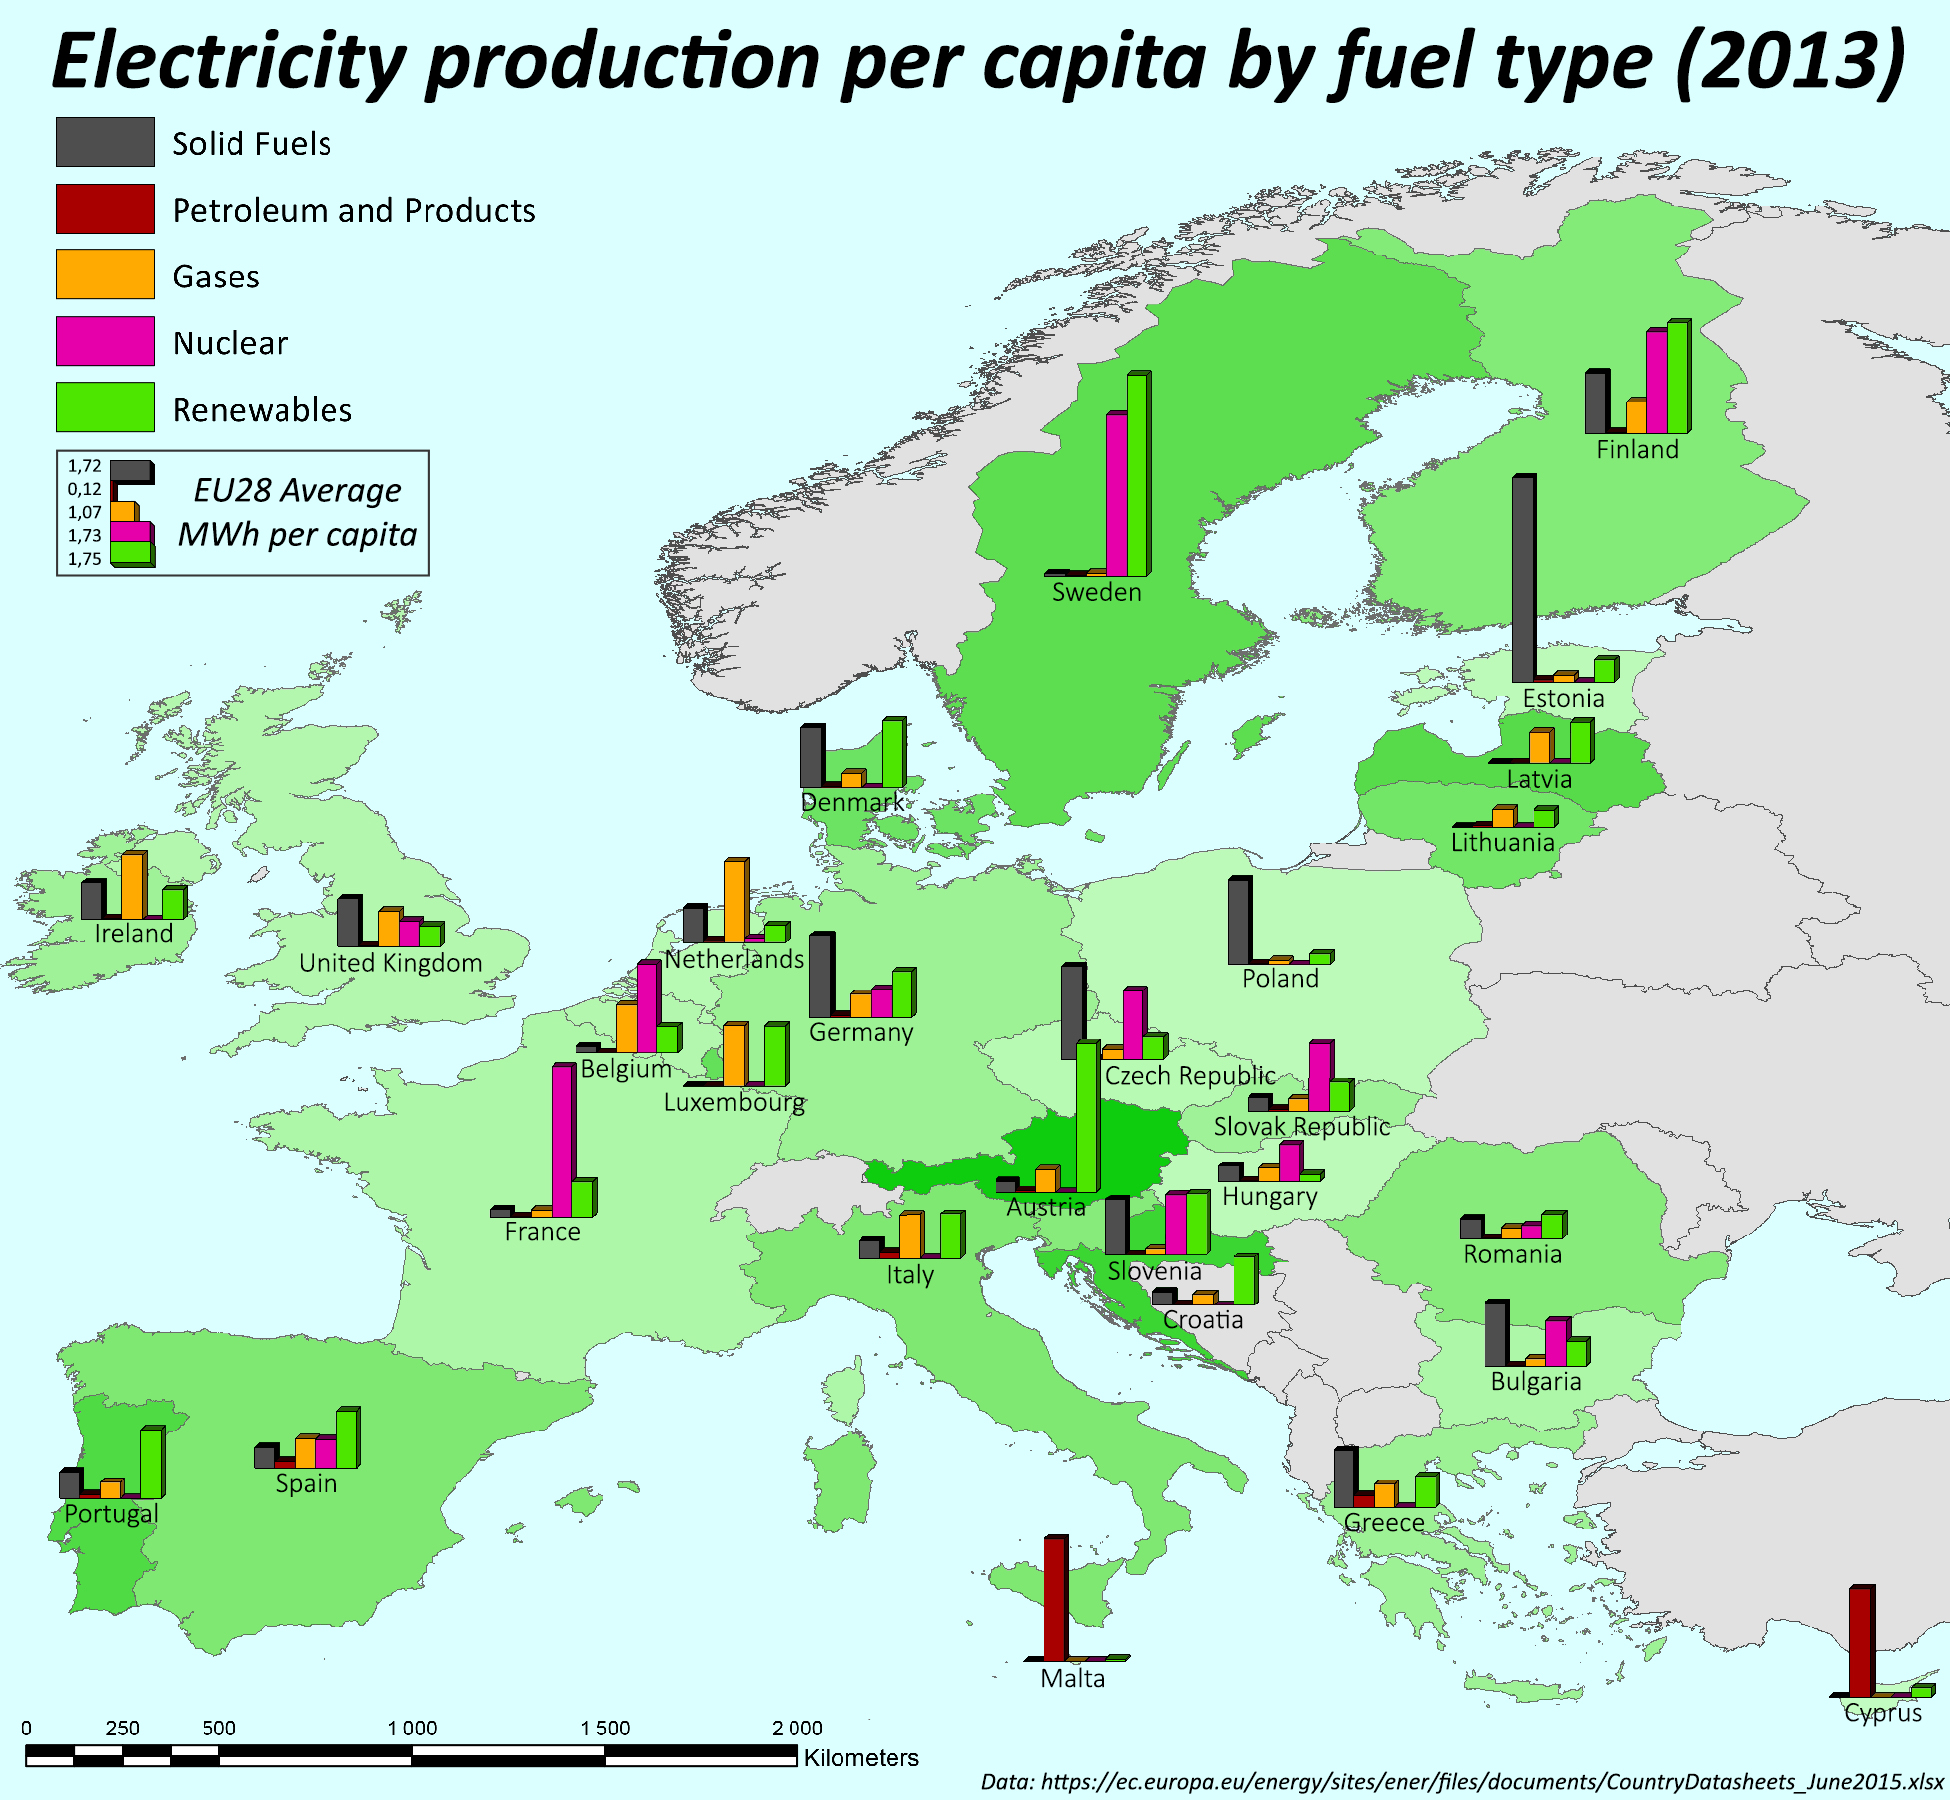 Europe's Electricity Production by Country and Fuel Type